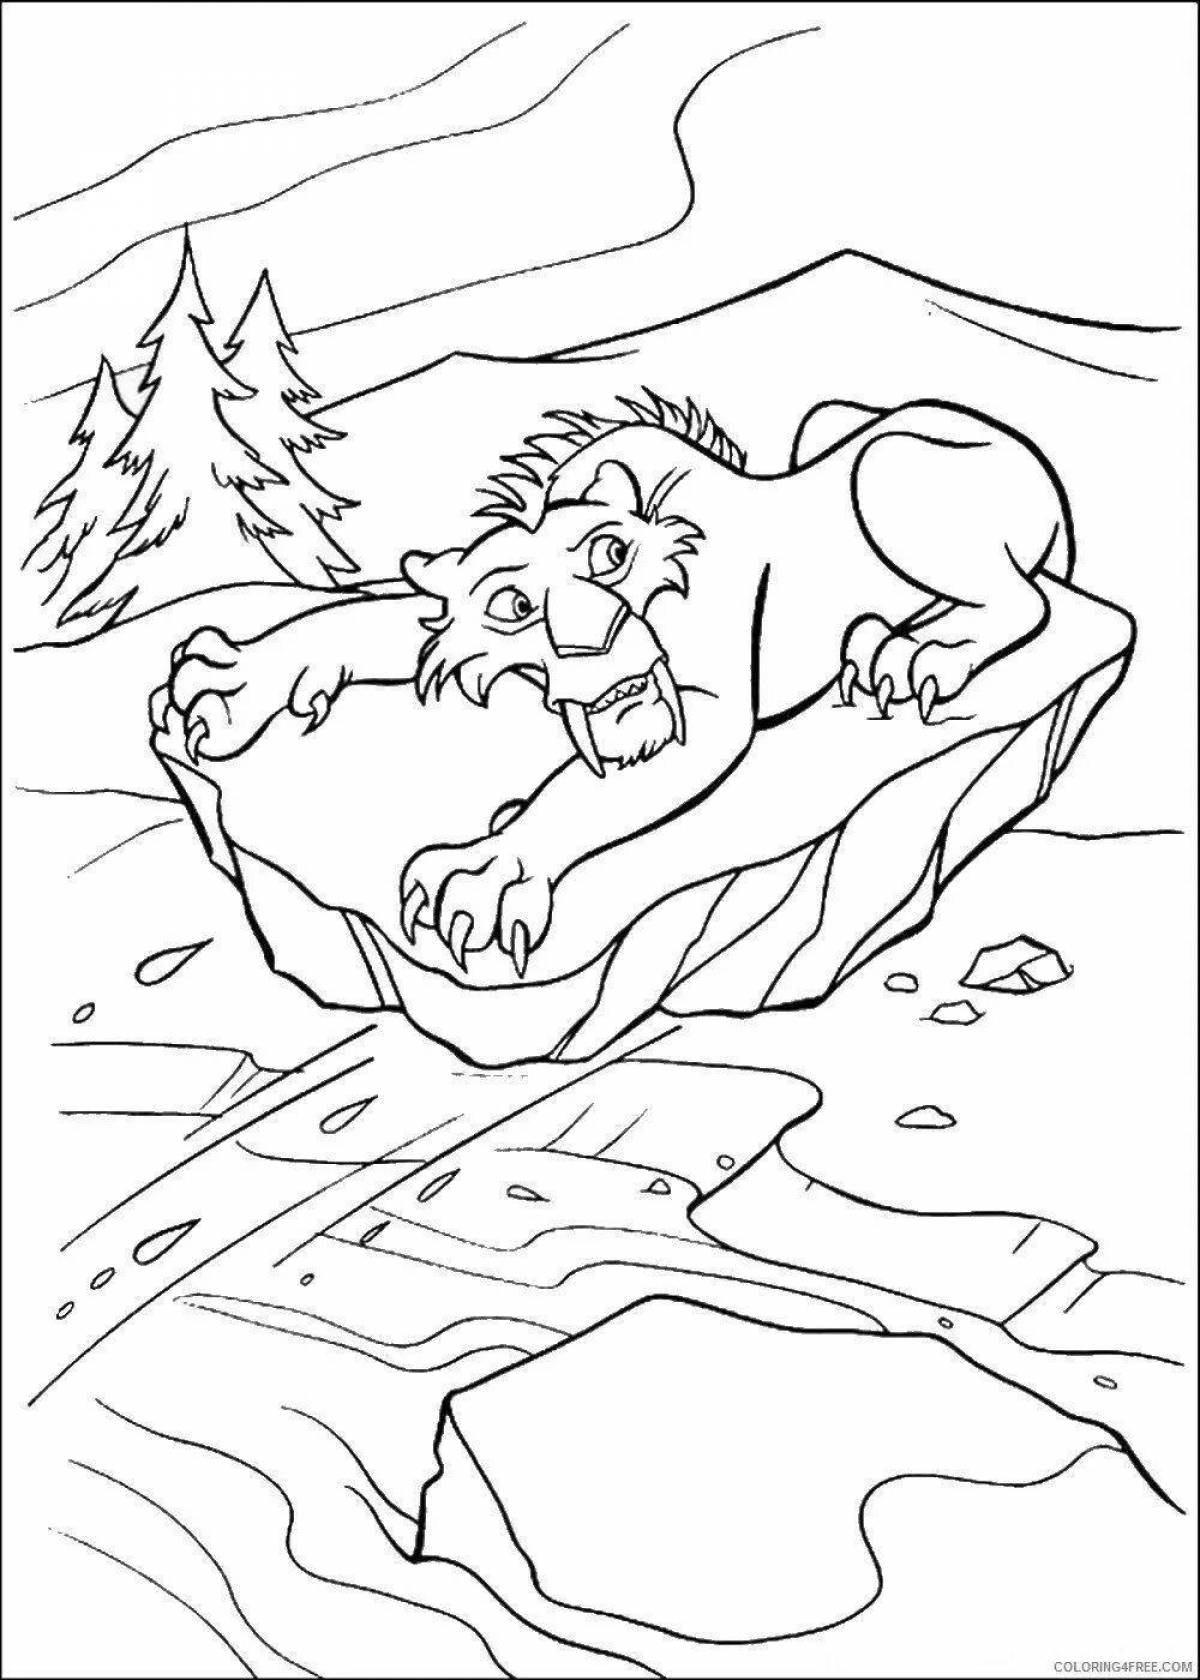 Marvelous ice age 4 coloring page